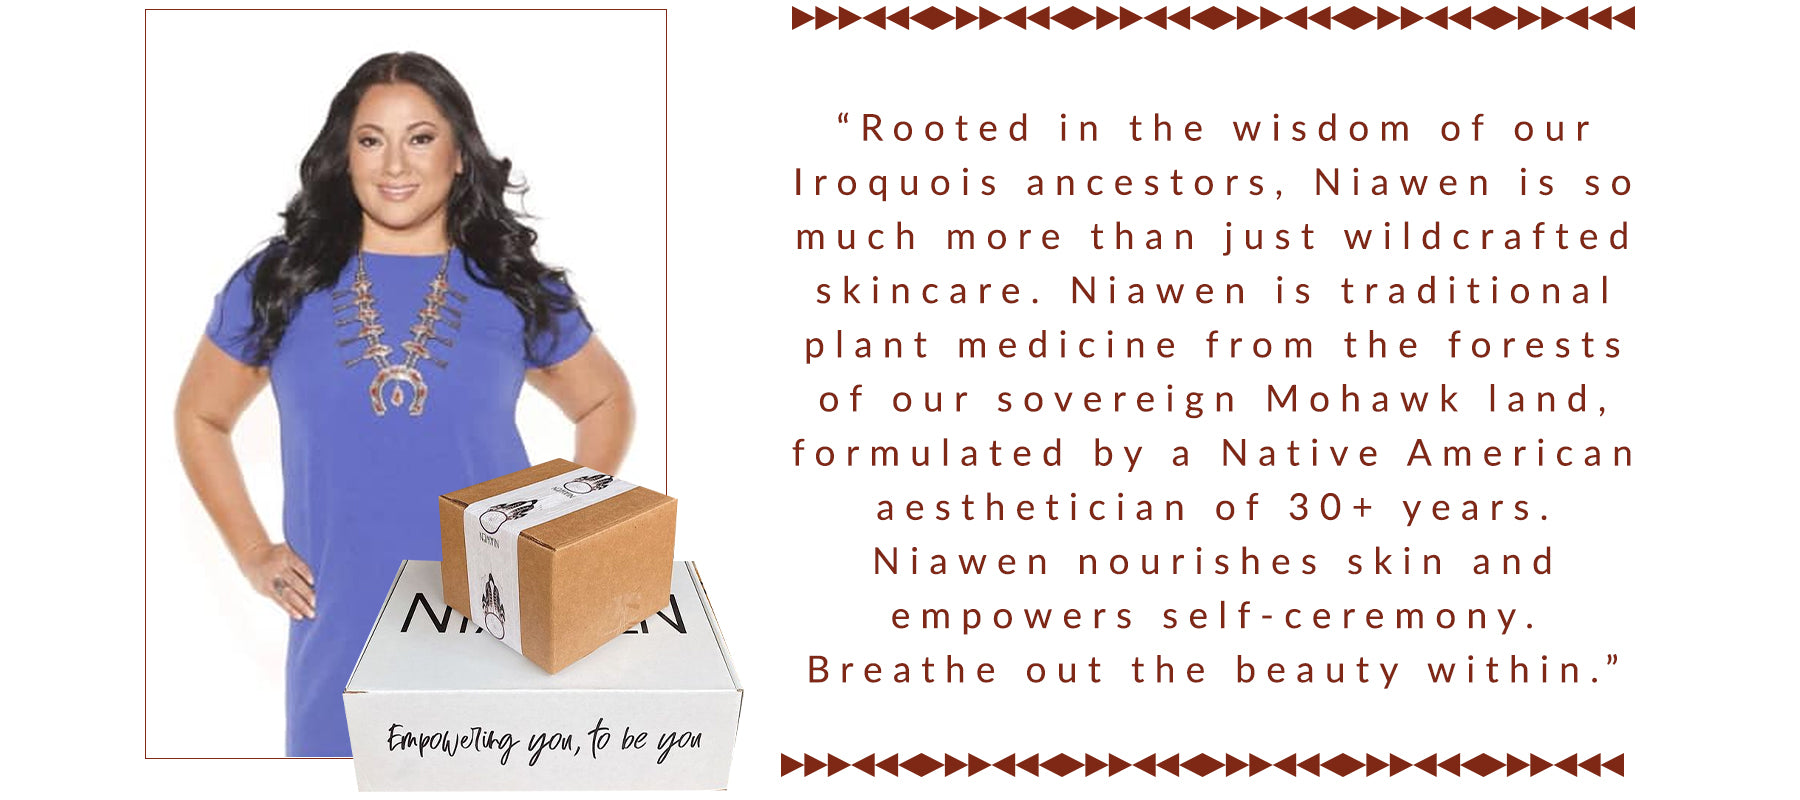 Niawen: Wildcrafted, Indigenous Skincare for Self-Ceremony